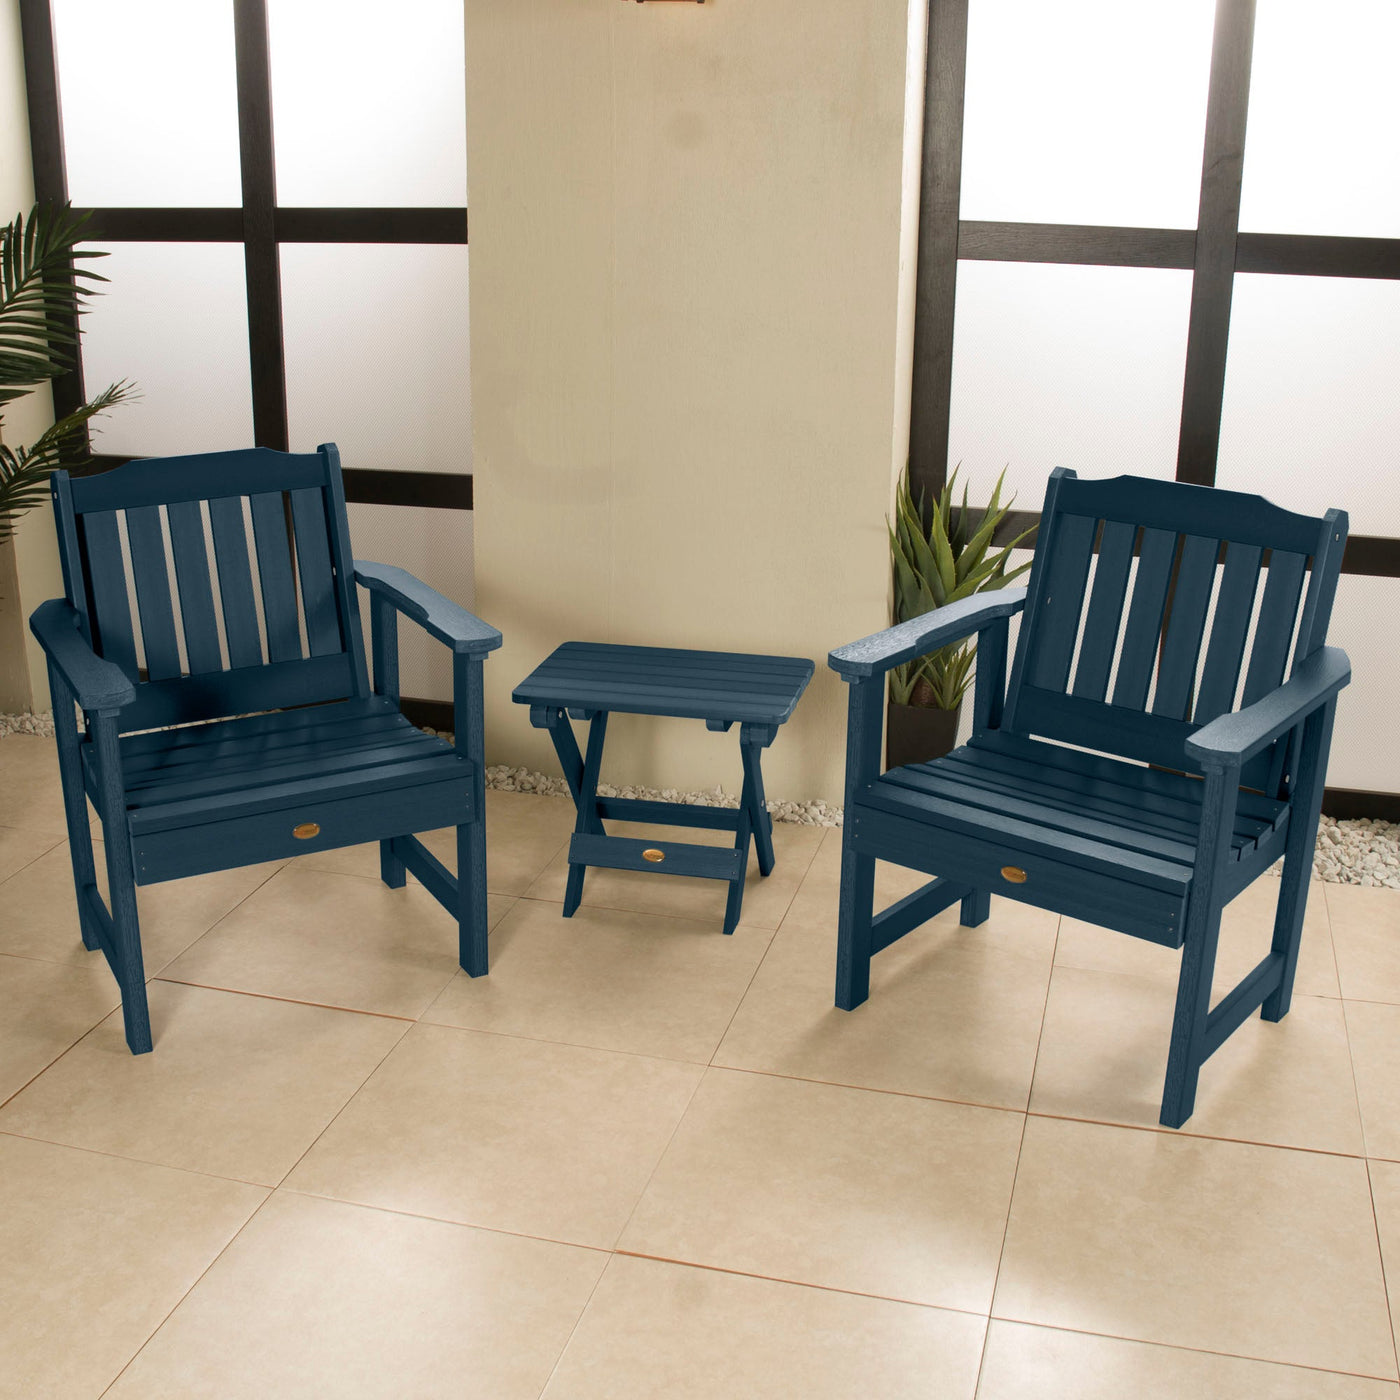 2 Lehigh Garden Chairs with Folding Adirondack Side Table Kitted Sets Highwood USA 